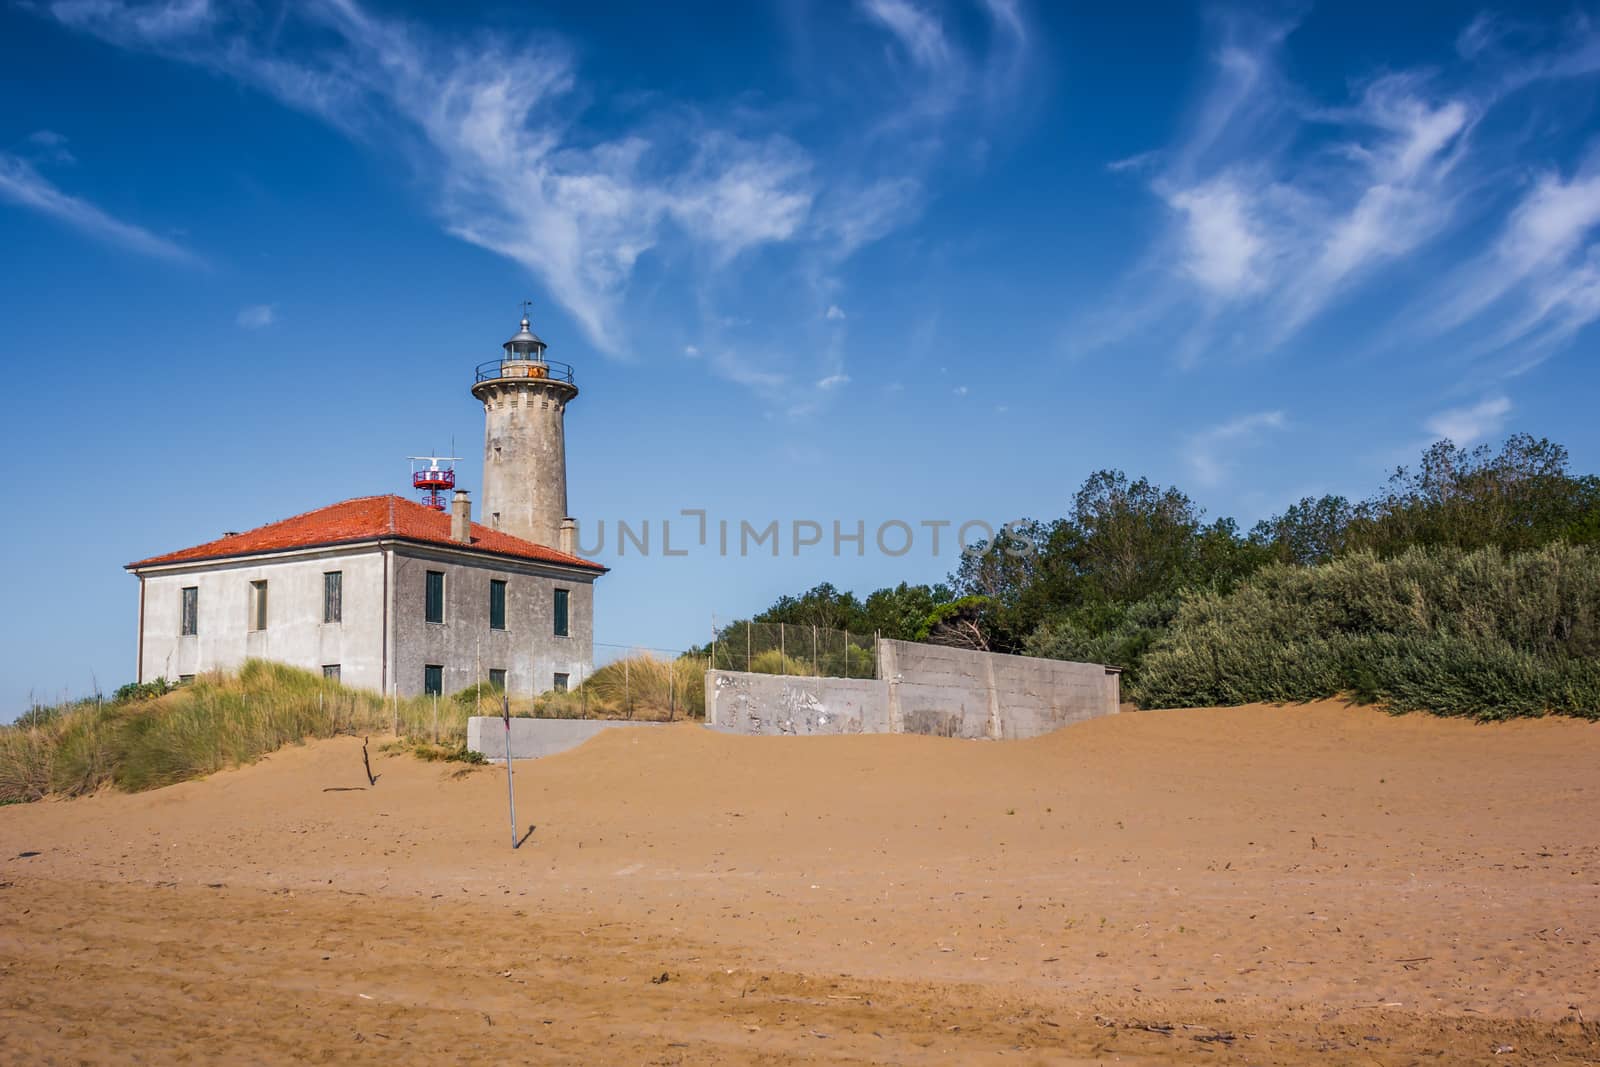 The lighthouse on the beach at the mouth of the river Tagliamento, Bibione, Venezia, Italy. Nice sunny weather. Famous travel destination. by petrsvoboda91